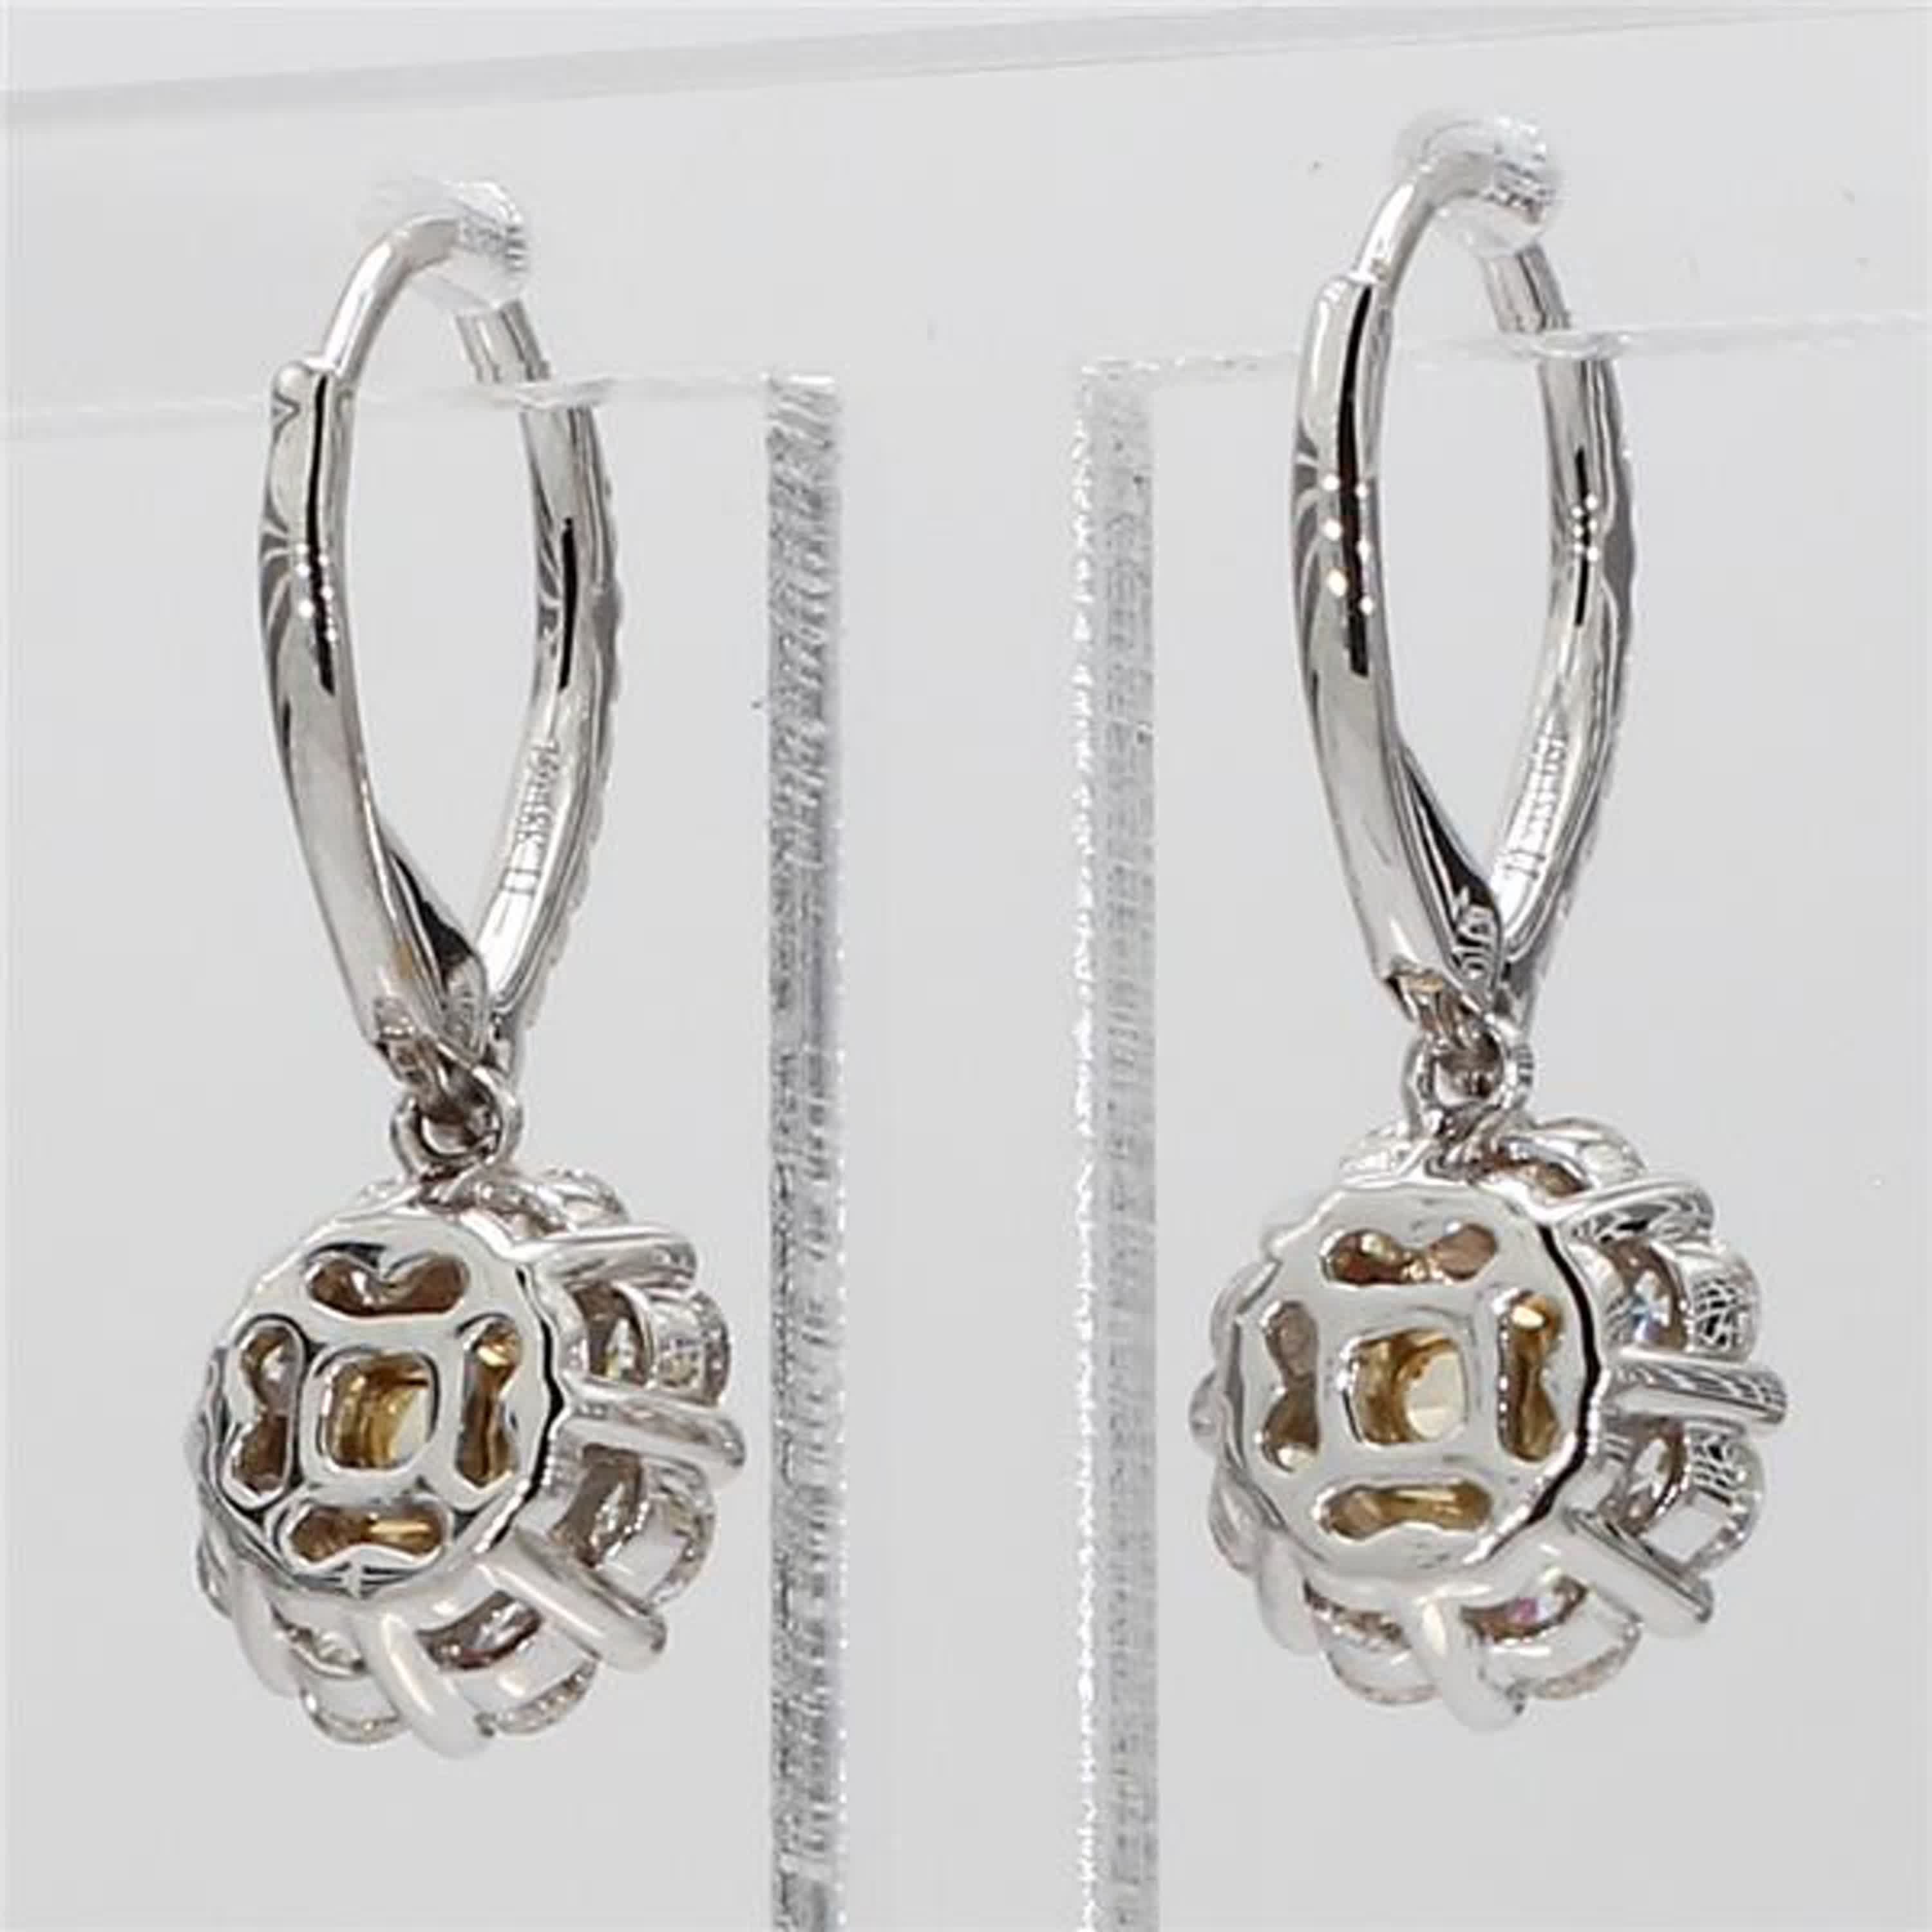 Natural Yellow Cushion and White Diamond 1.48 Carat TW Gold Drop Earrings